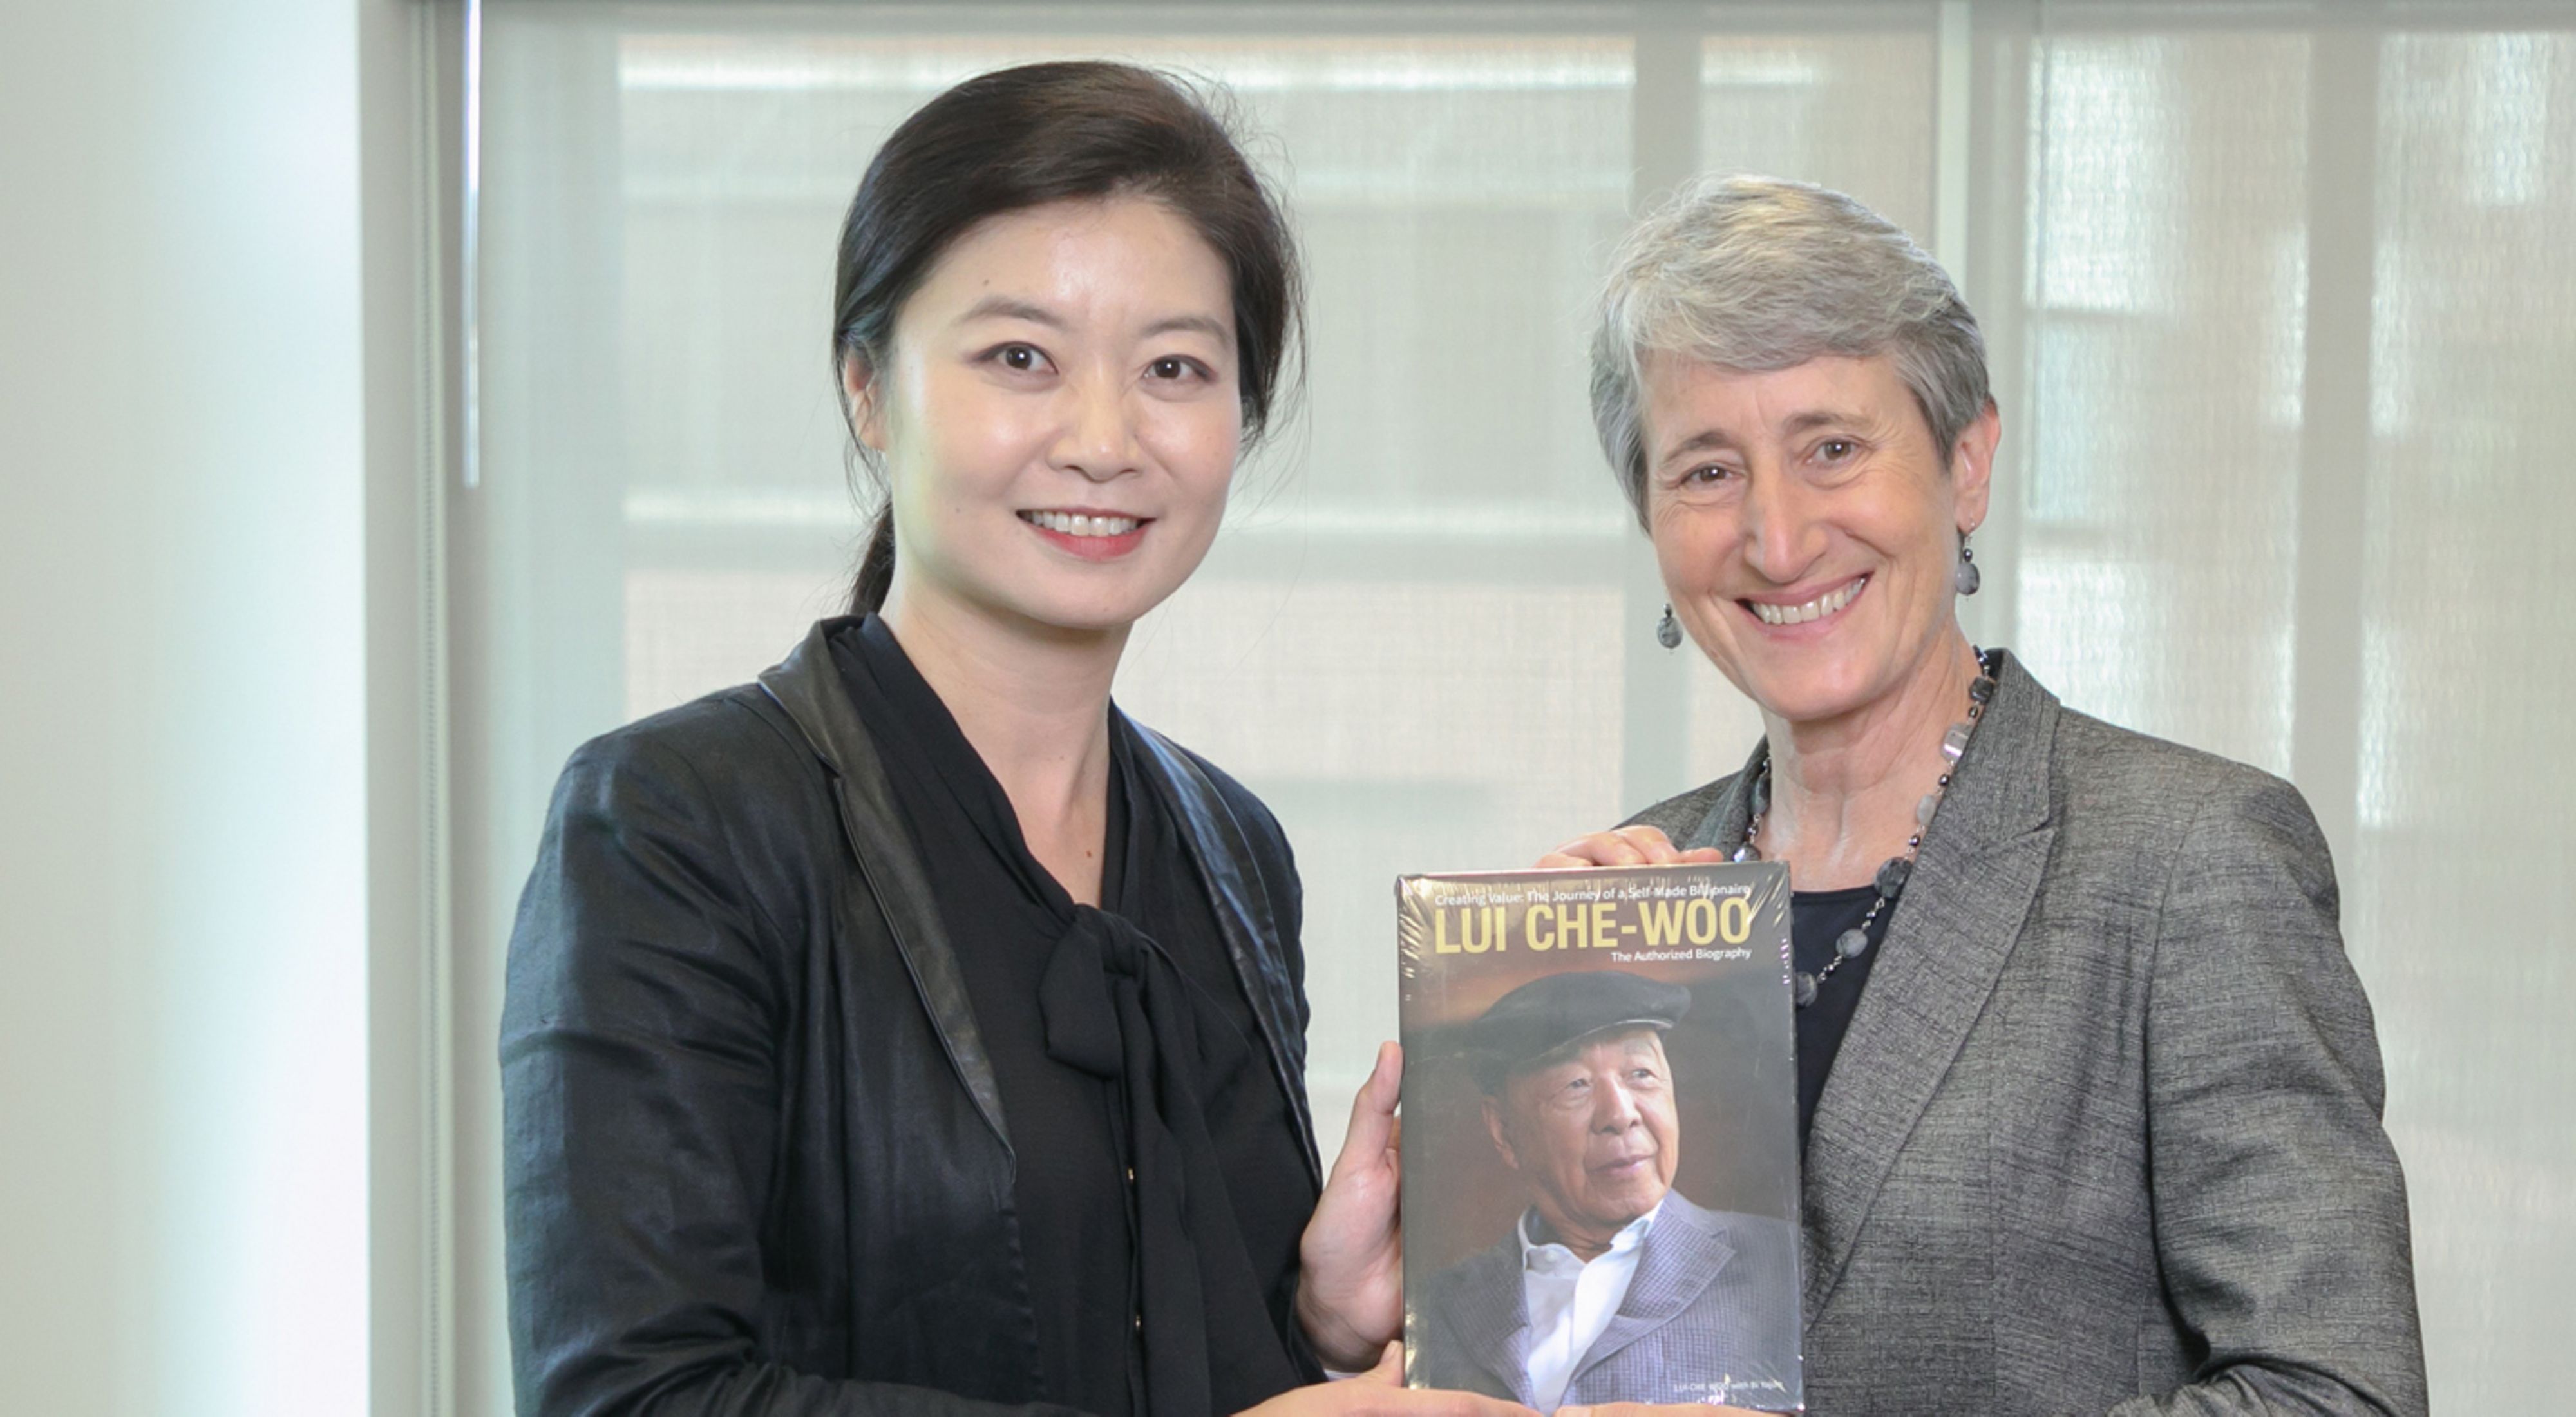 for Sustainability was awarded to TNC. LUI Che Woo Prize General Manager Yvonne Lai (left) met with TNC CEO Sally Jewell (right) at our Worldwide Office in Arlington, Virginia